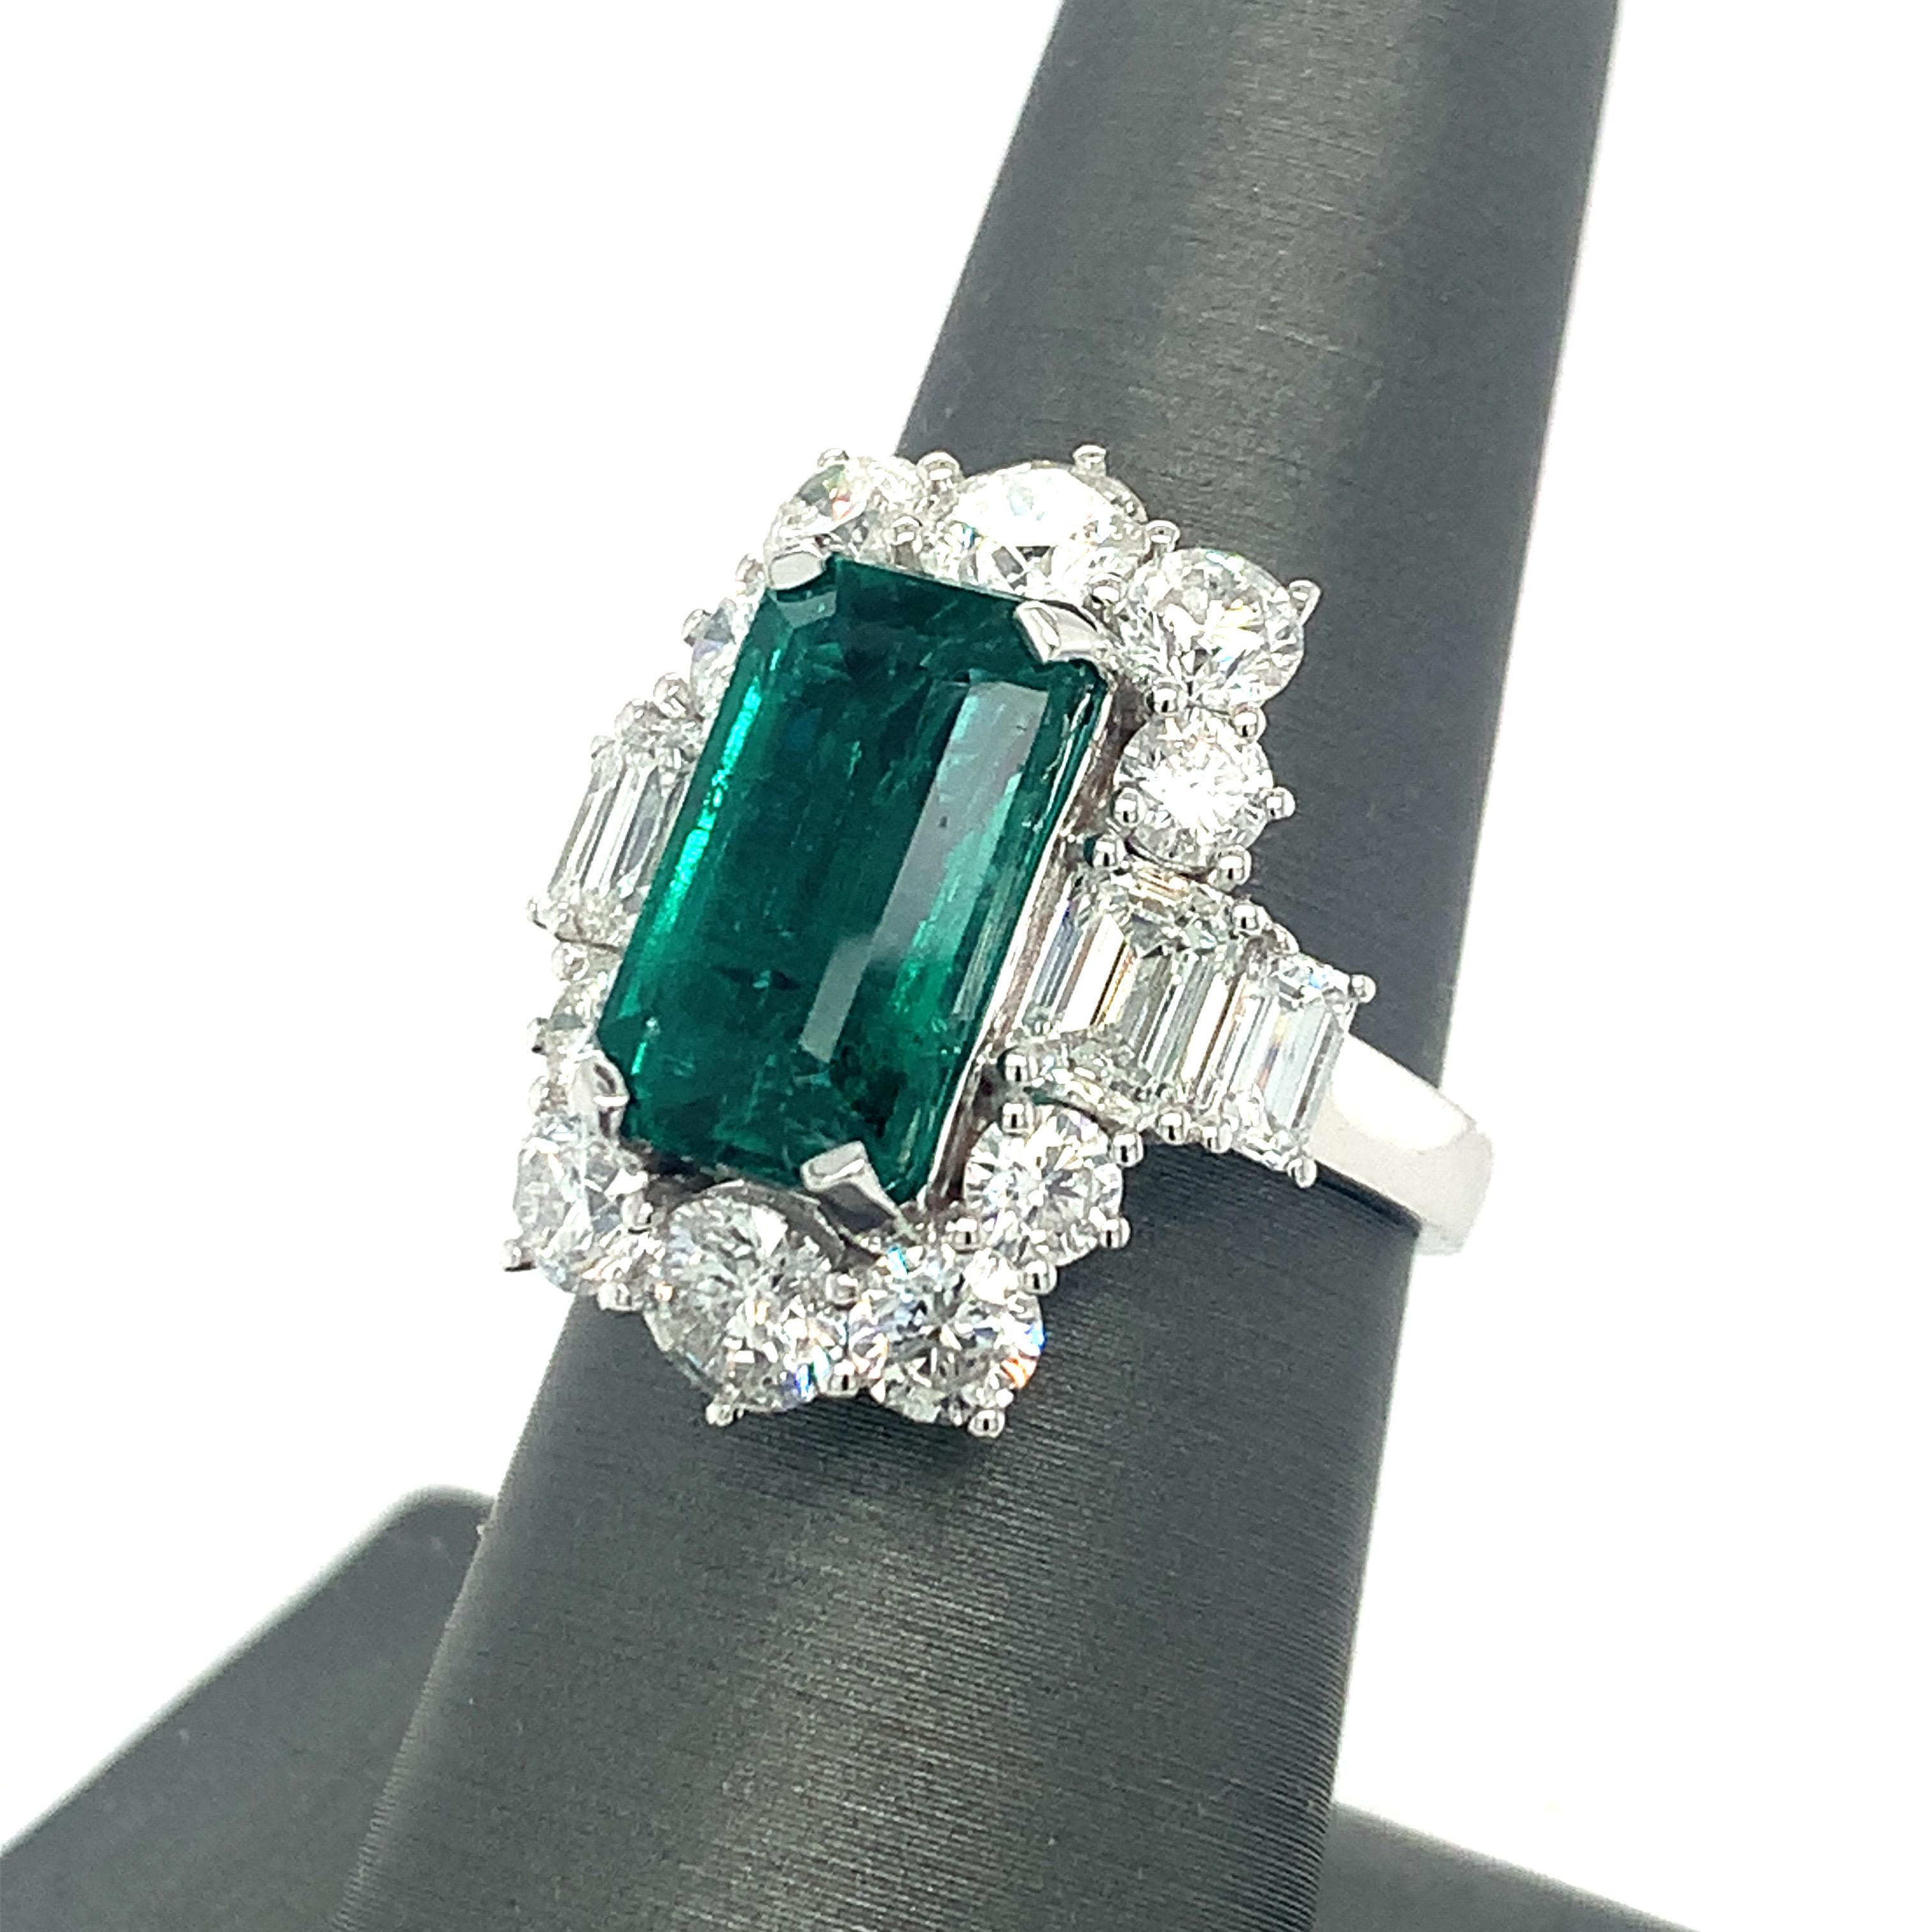 Emerald Cut GIA Certified 4.80 Carat Emerald Diamond Cocktail Ring For Sale